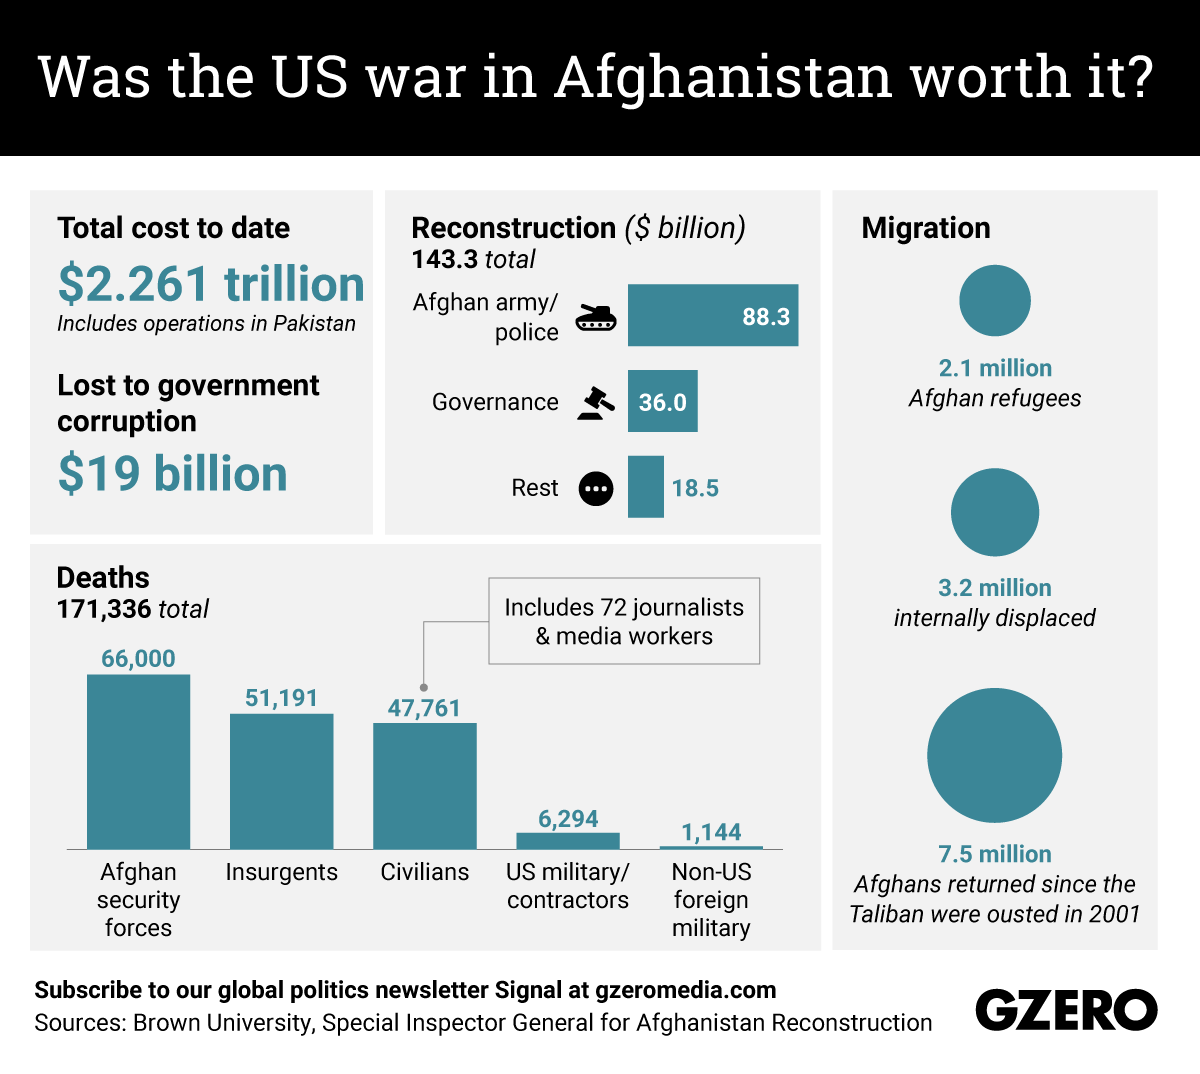 The Graphic Truth: Was the US war in Afghanistan worth it?